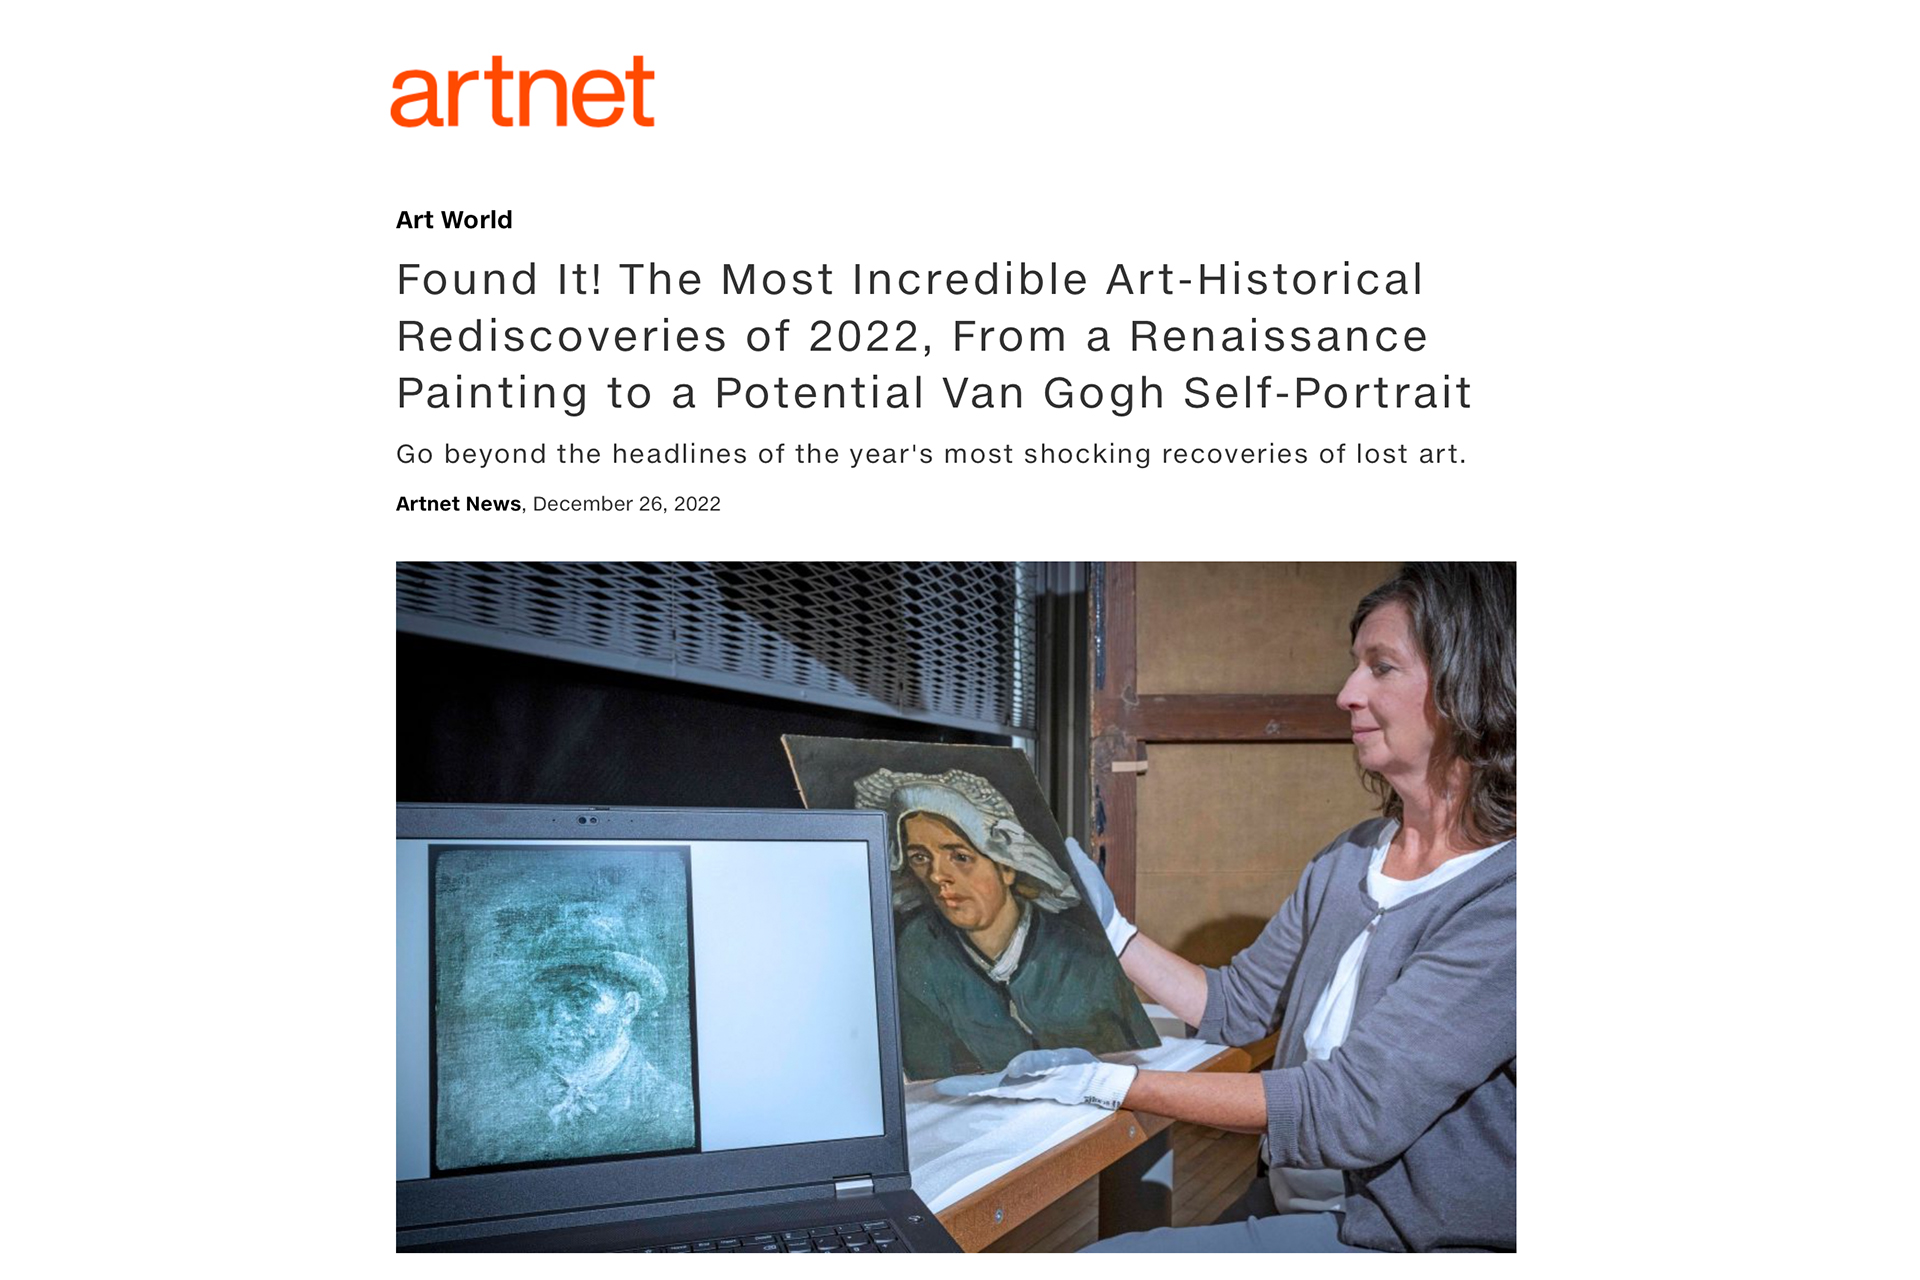 « Found It! The Most Incredible Art-Historical Rediscoveries of 2022 », 26 décembre 2022